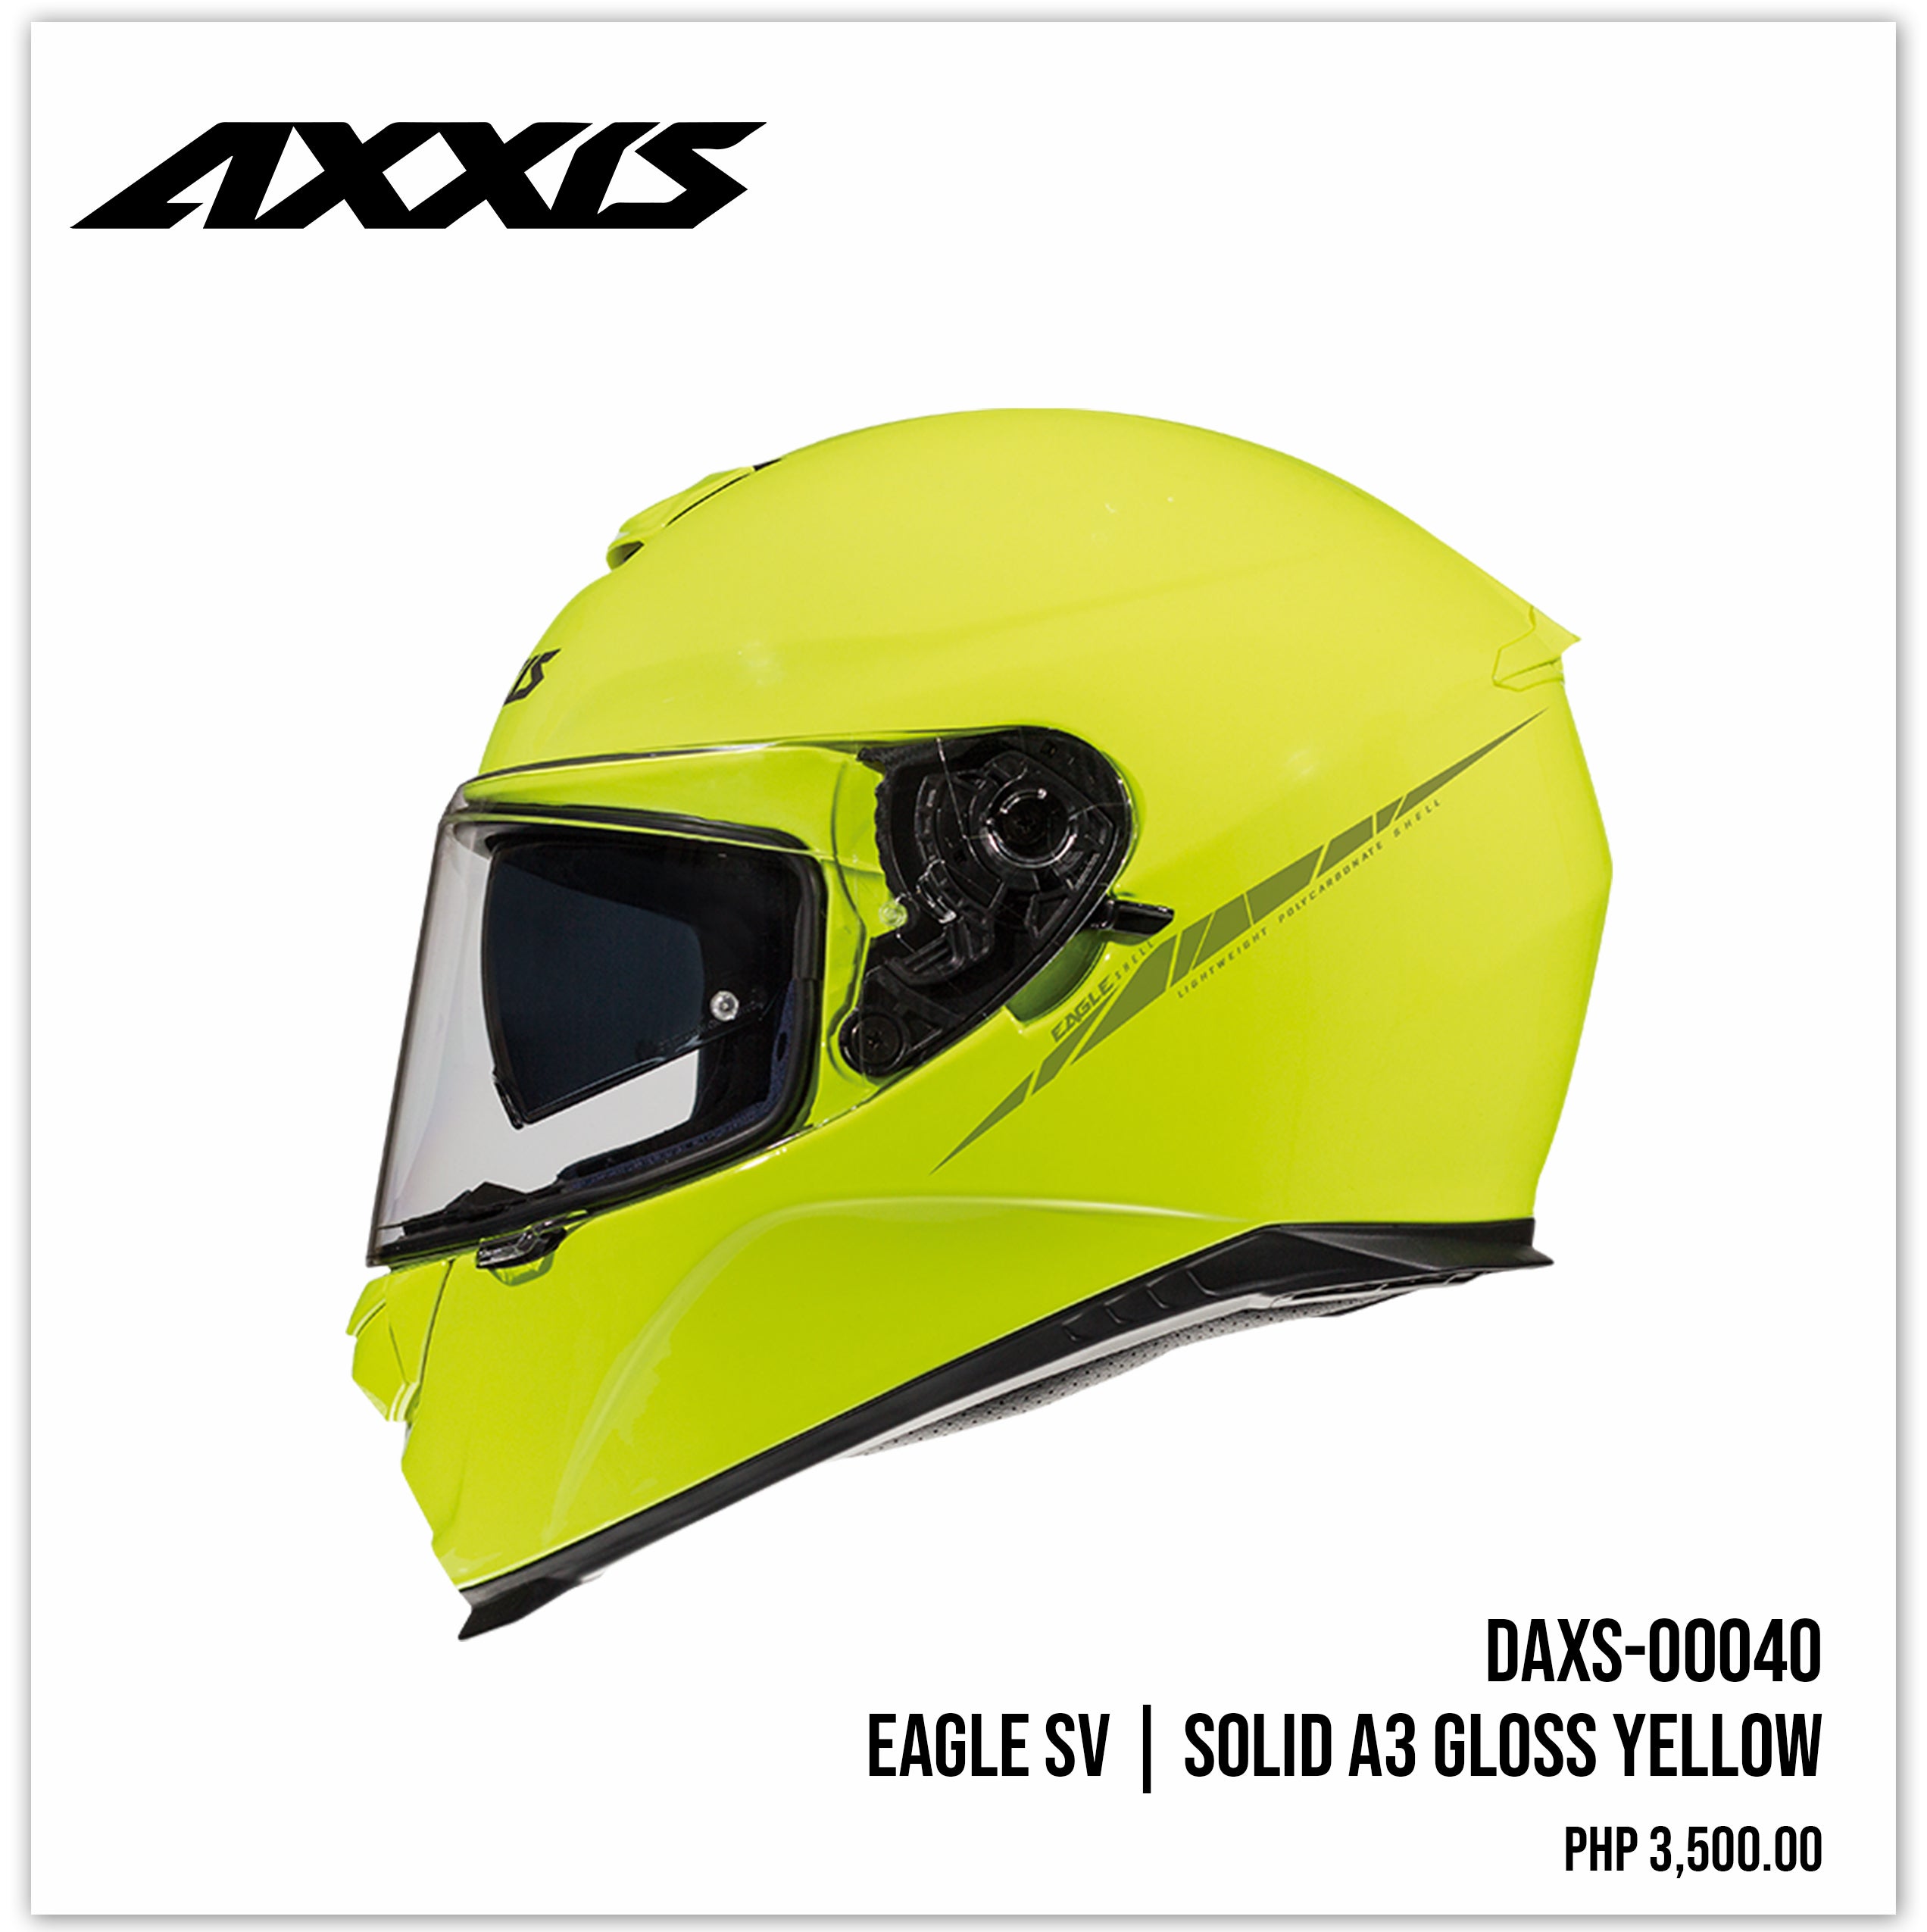 Eagle SV Solid A3 Gloss Yellow